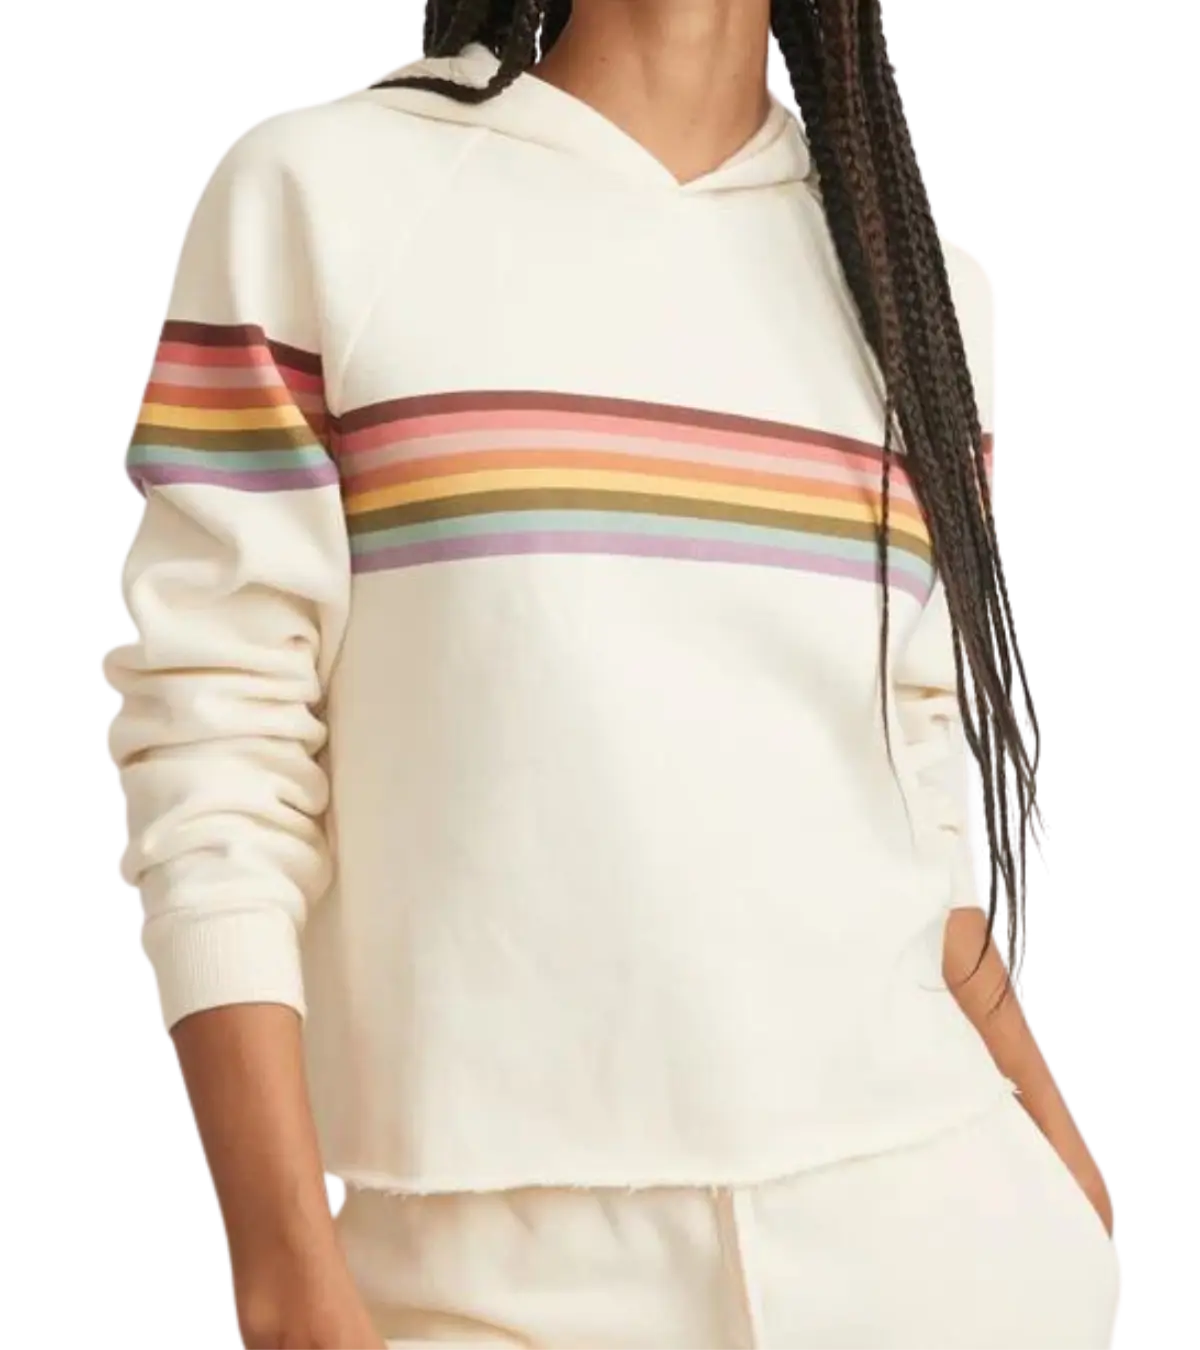 Marine Layer Women's Anytime Cropped Hoodie in White